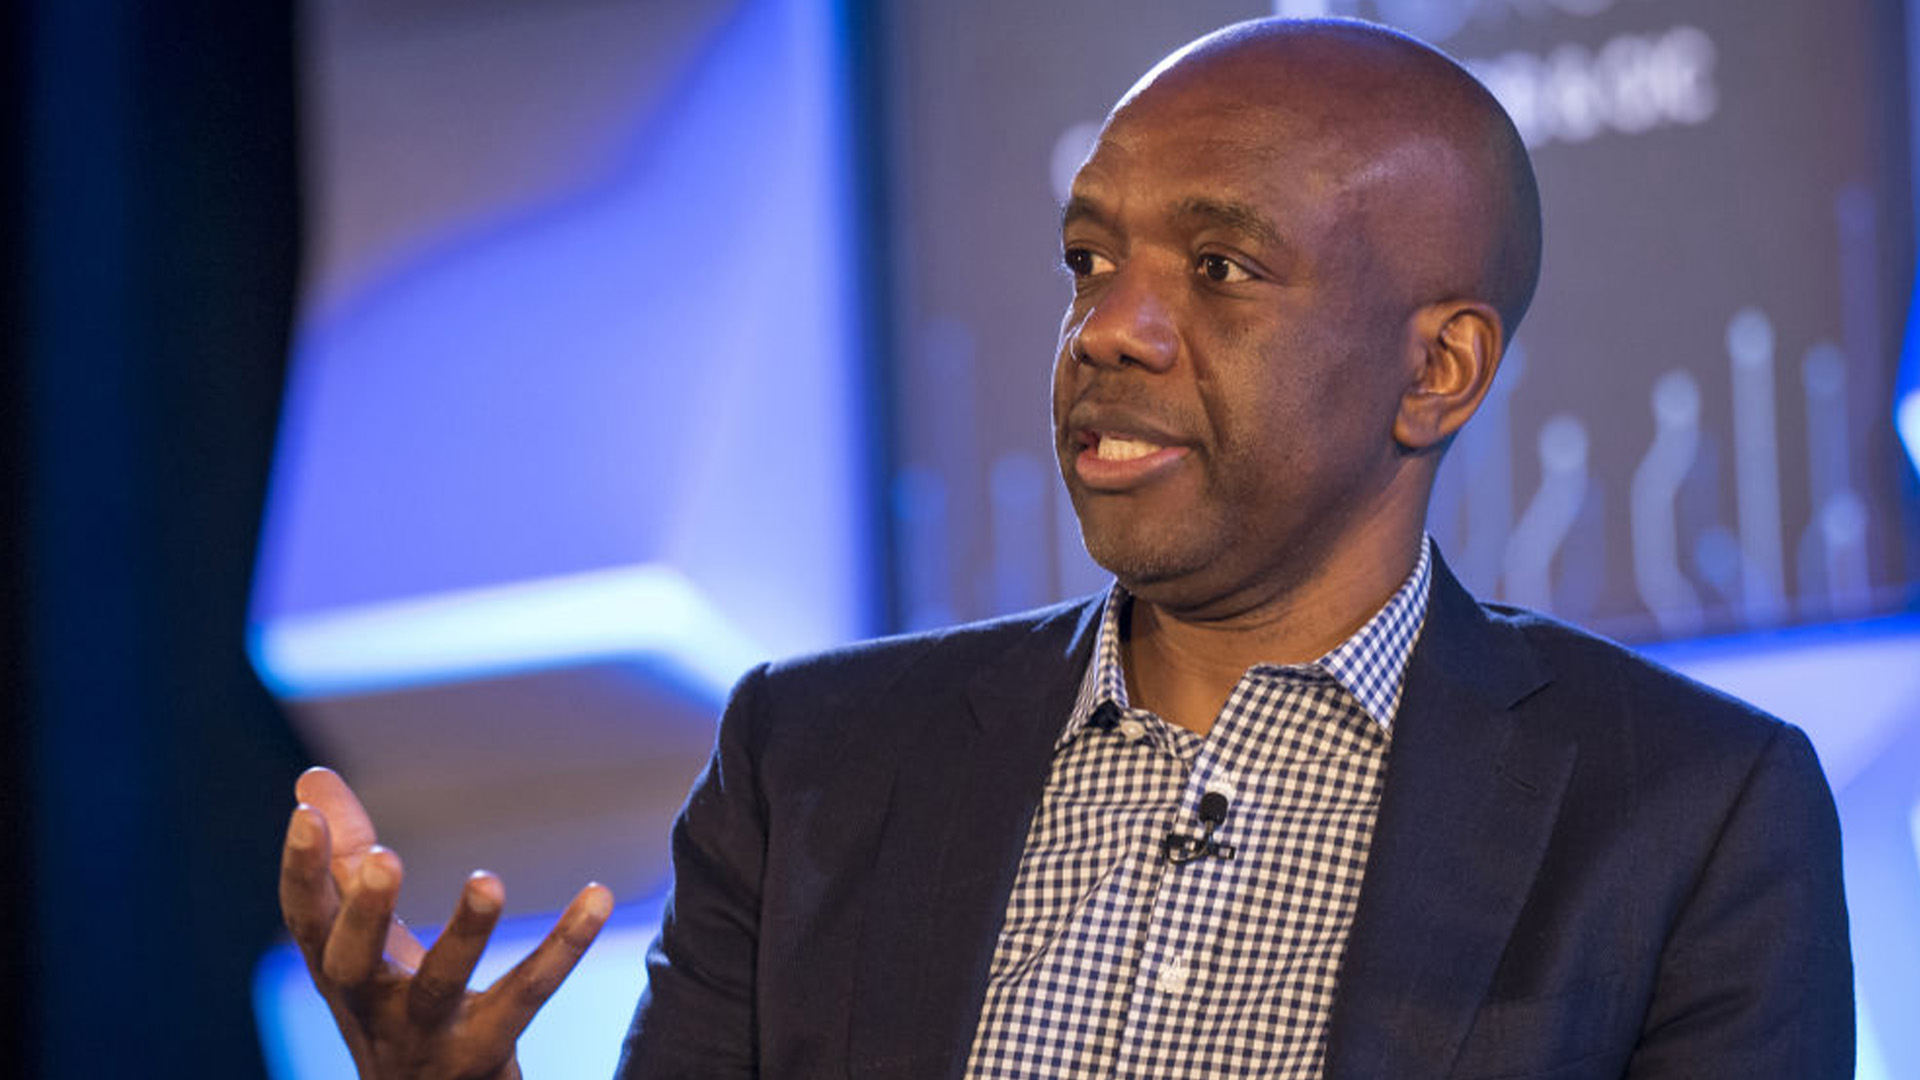 Airbnb Appoints Google's James Manyika To Its Board Of Directors To Transform The Platform With AI